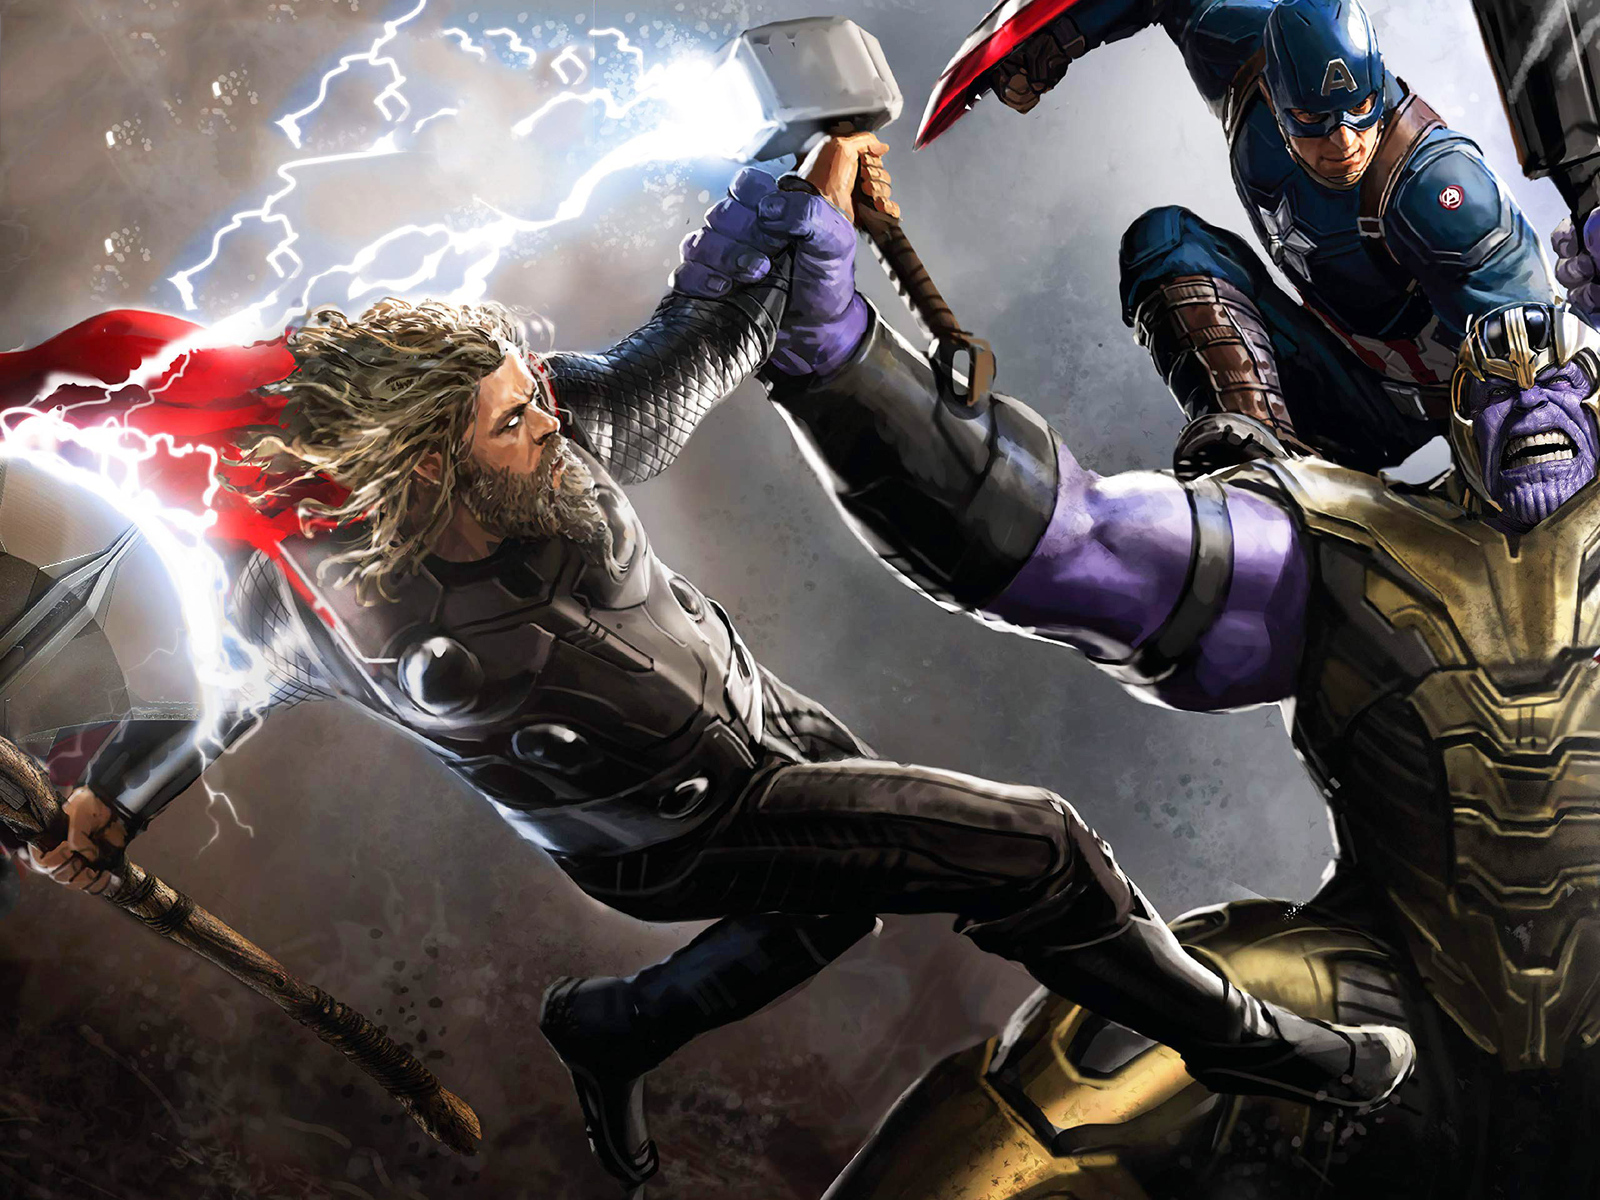 Thor And Thanos Avengers Endgame In 1600x1200 Resolution. thor-and-thanos-a...